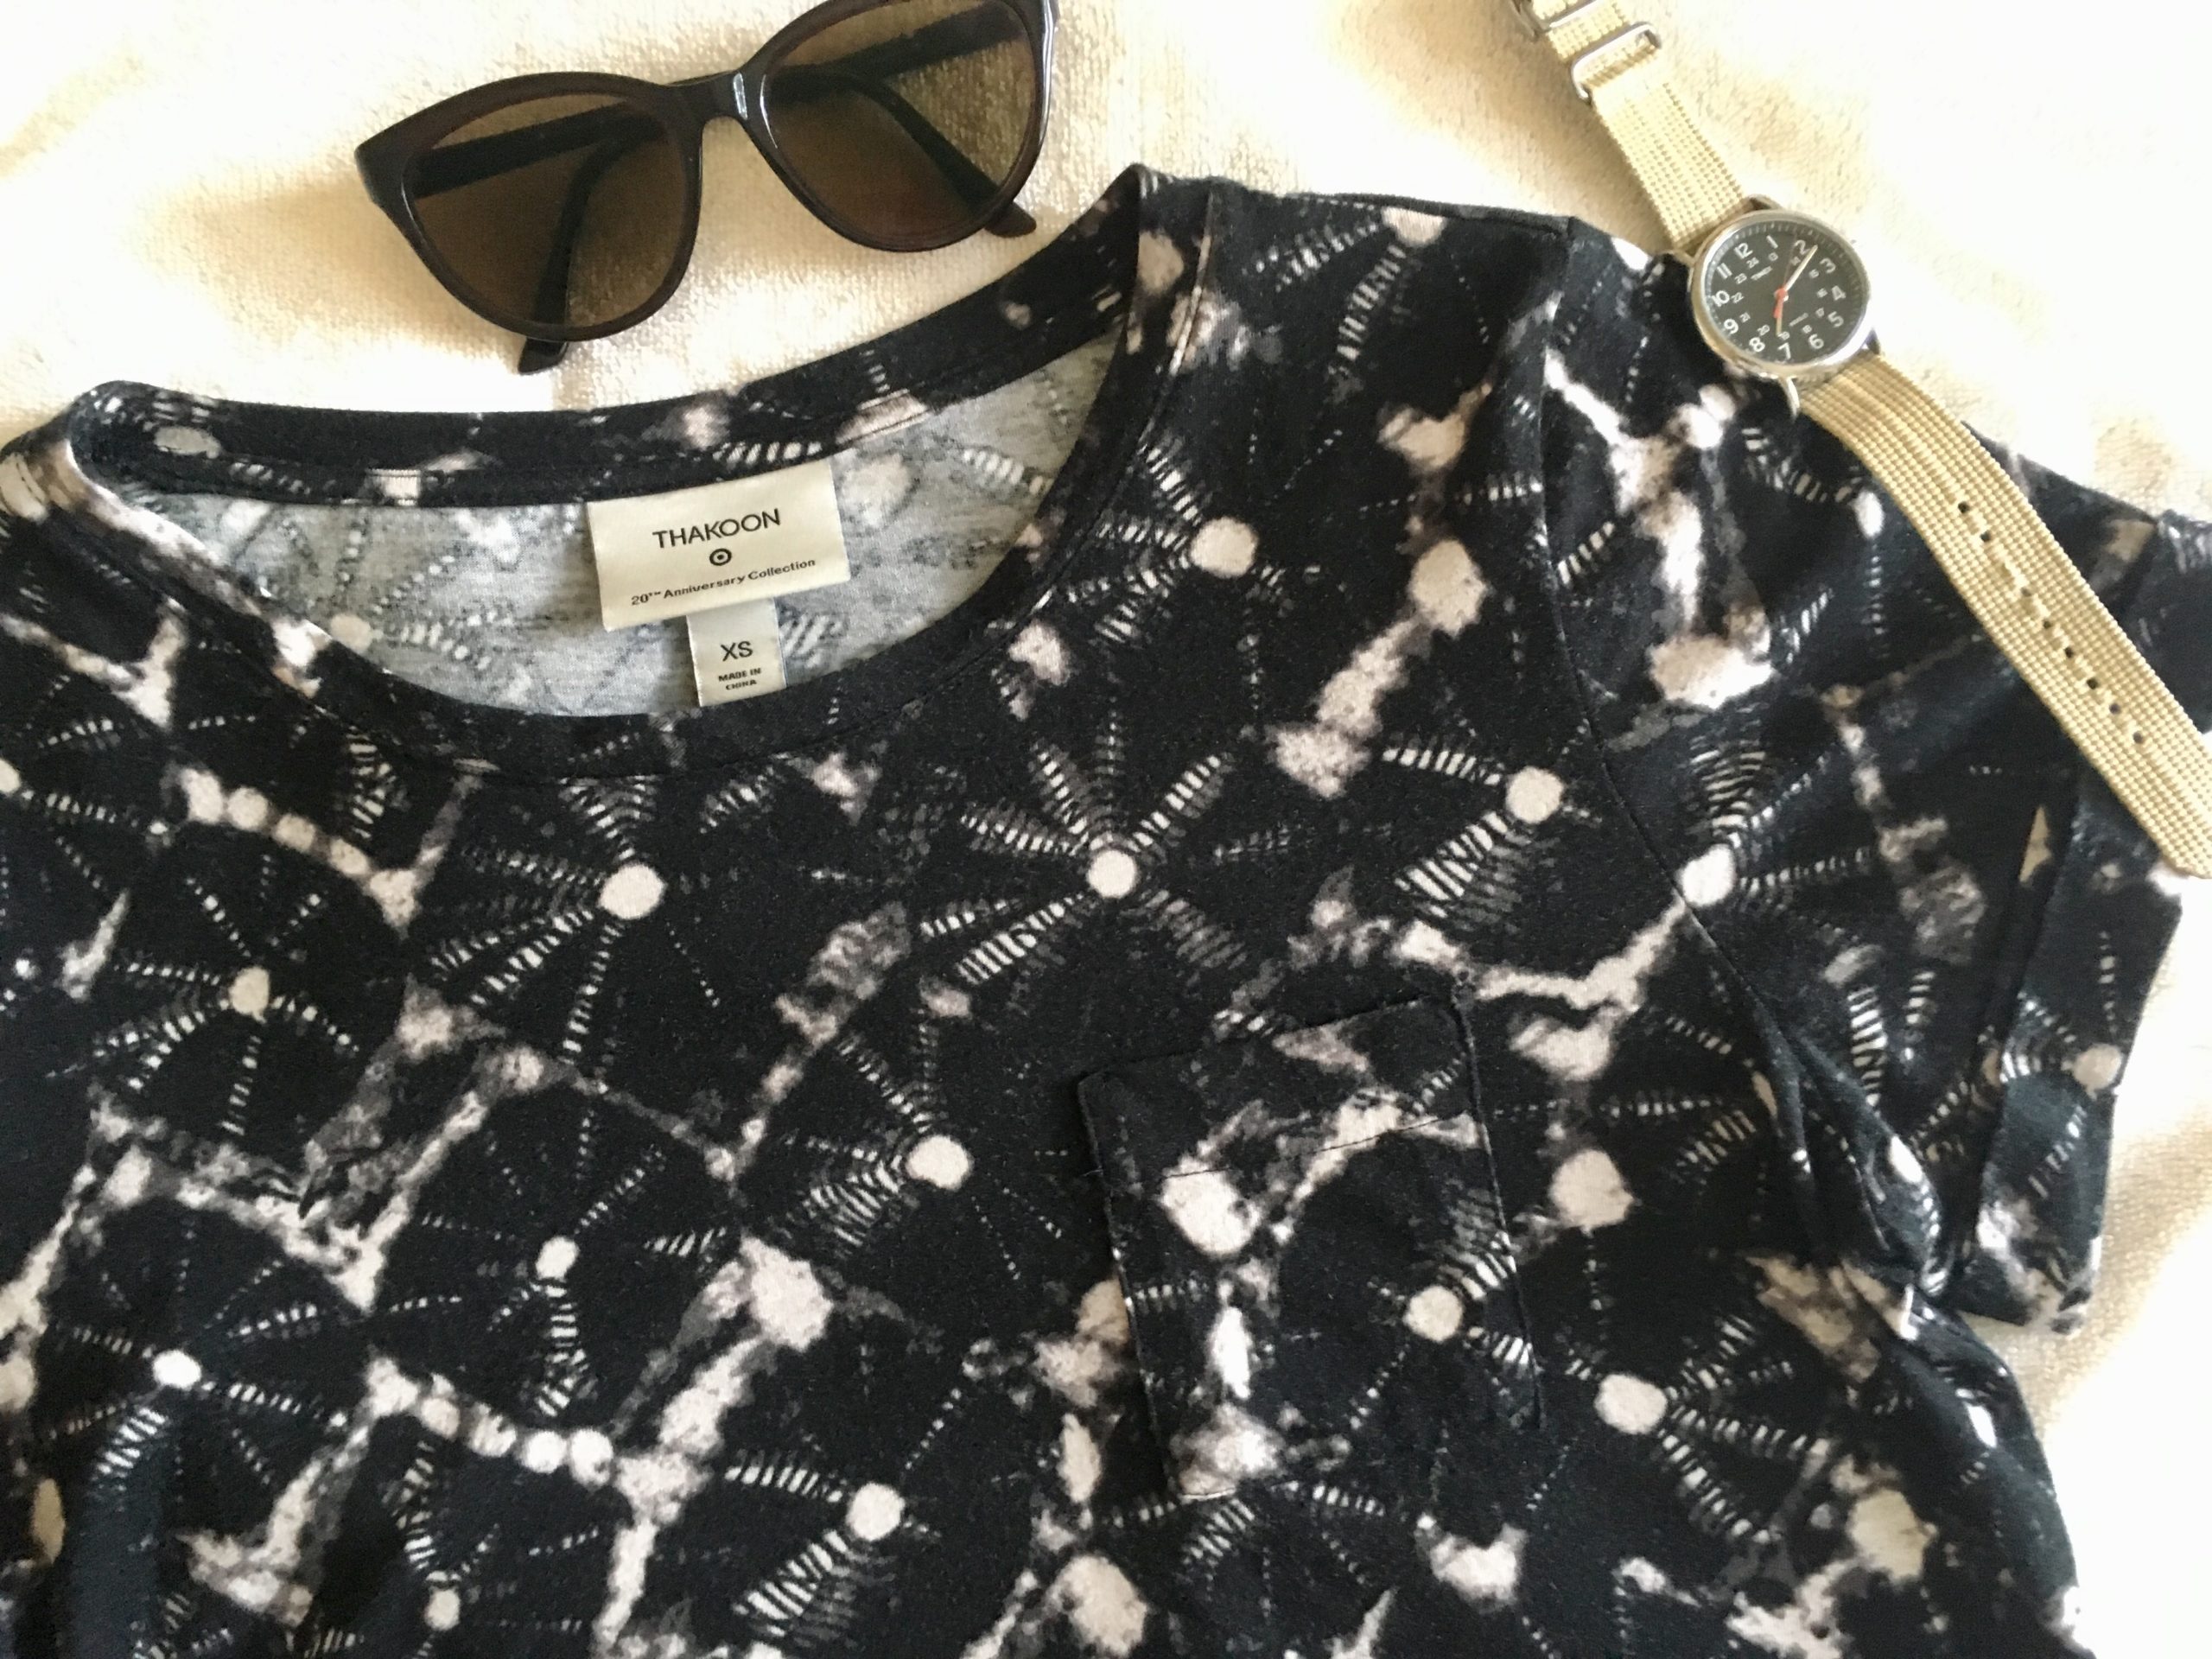 Thakoon for Target shibori print black and cream T-shirt with sunglasses on a white surface.